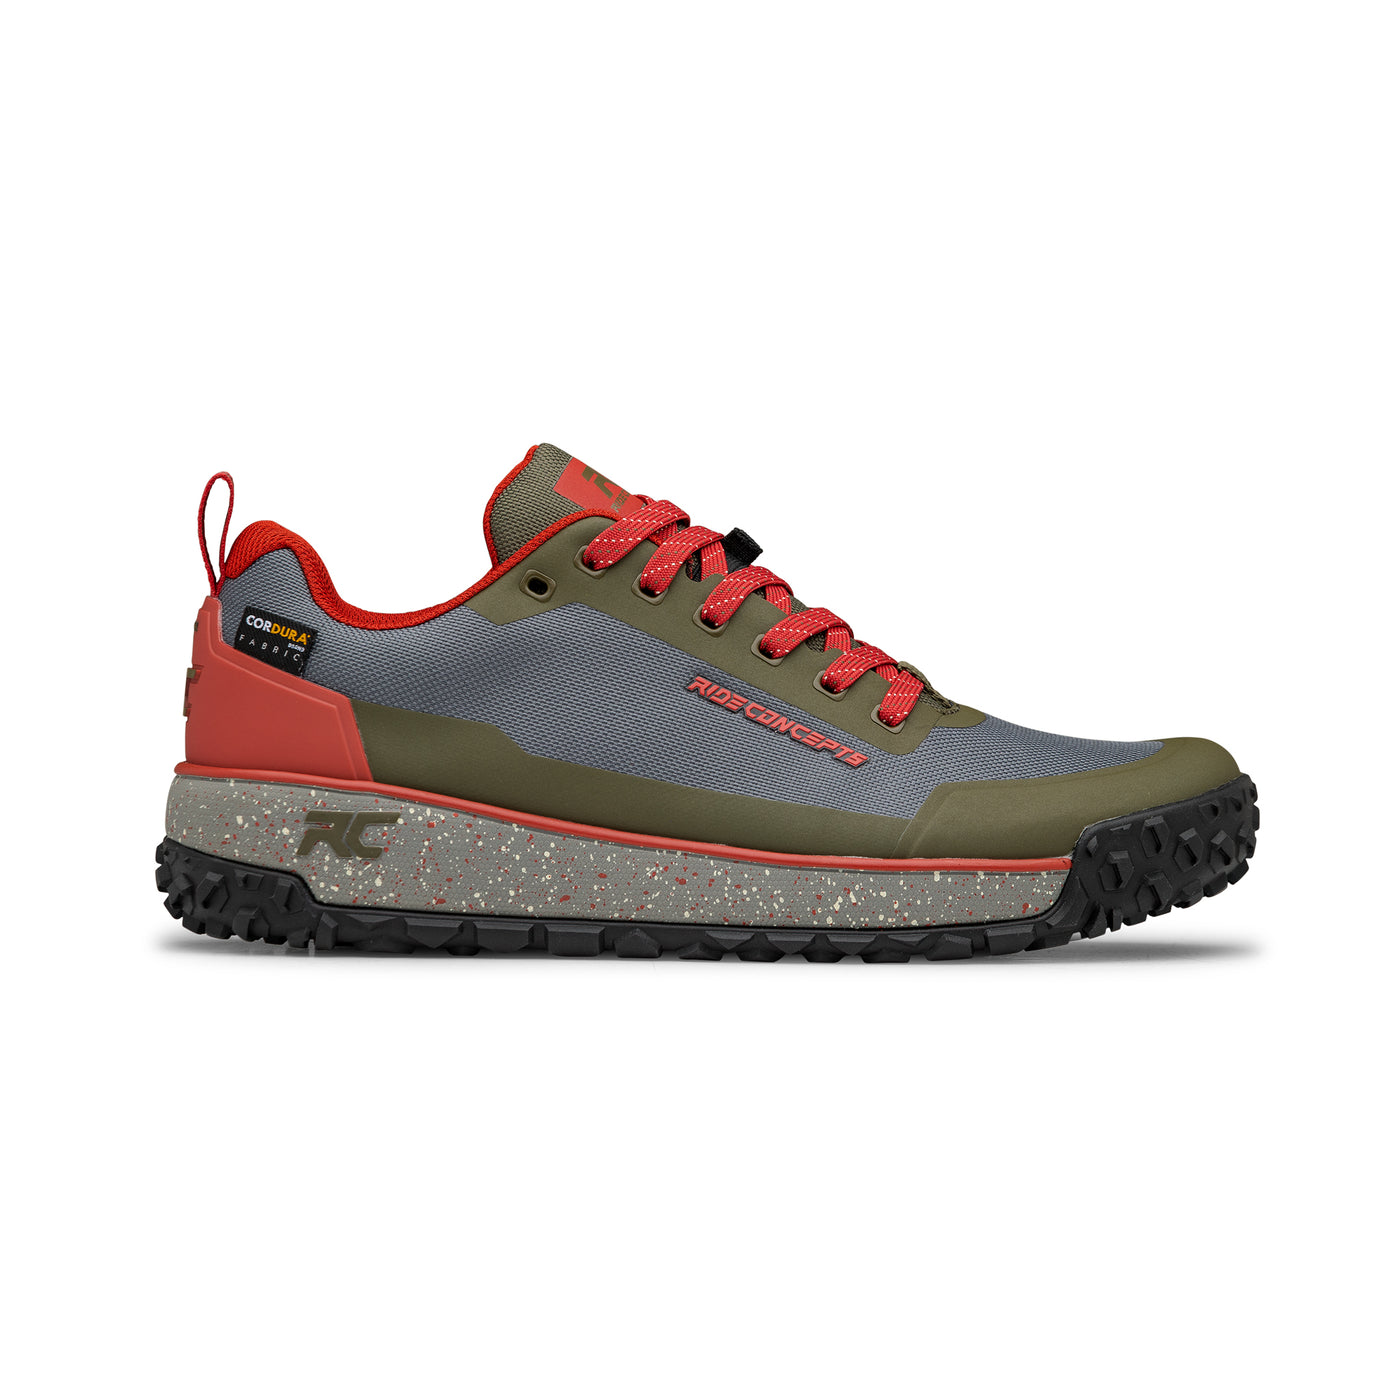 Ride Concepts Men's Tallac MTB Shoe - Charcoal and Oxblood